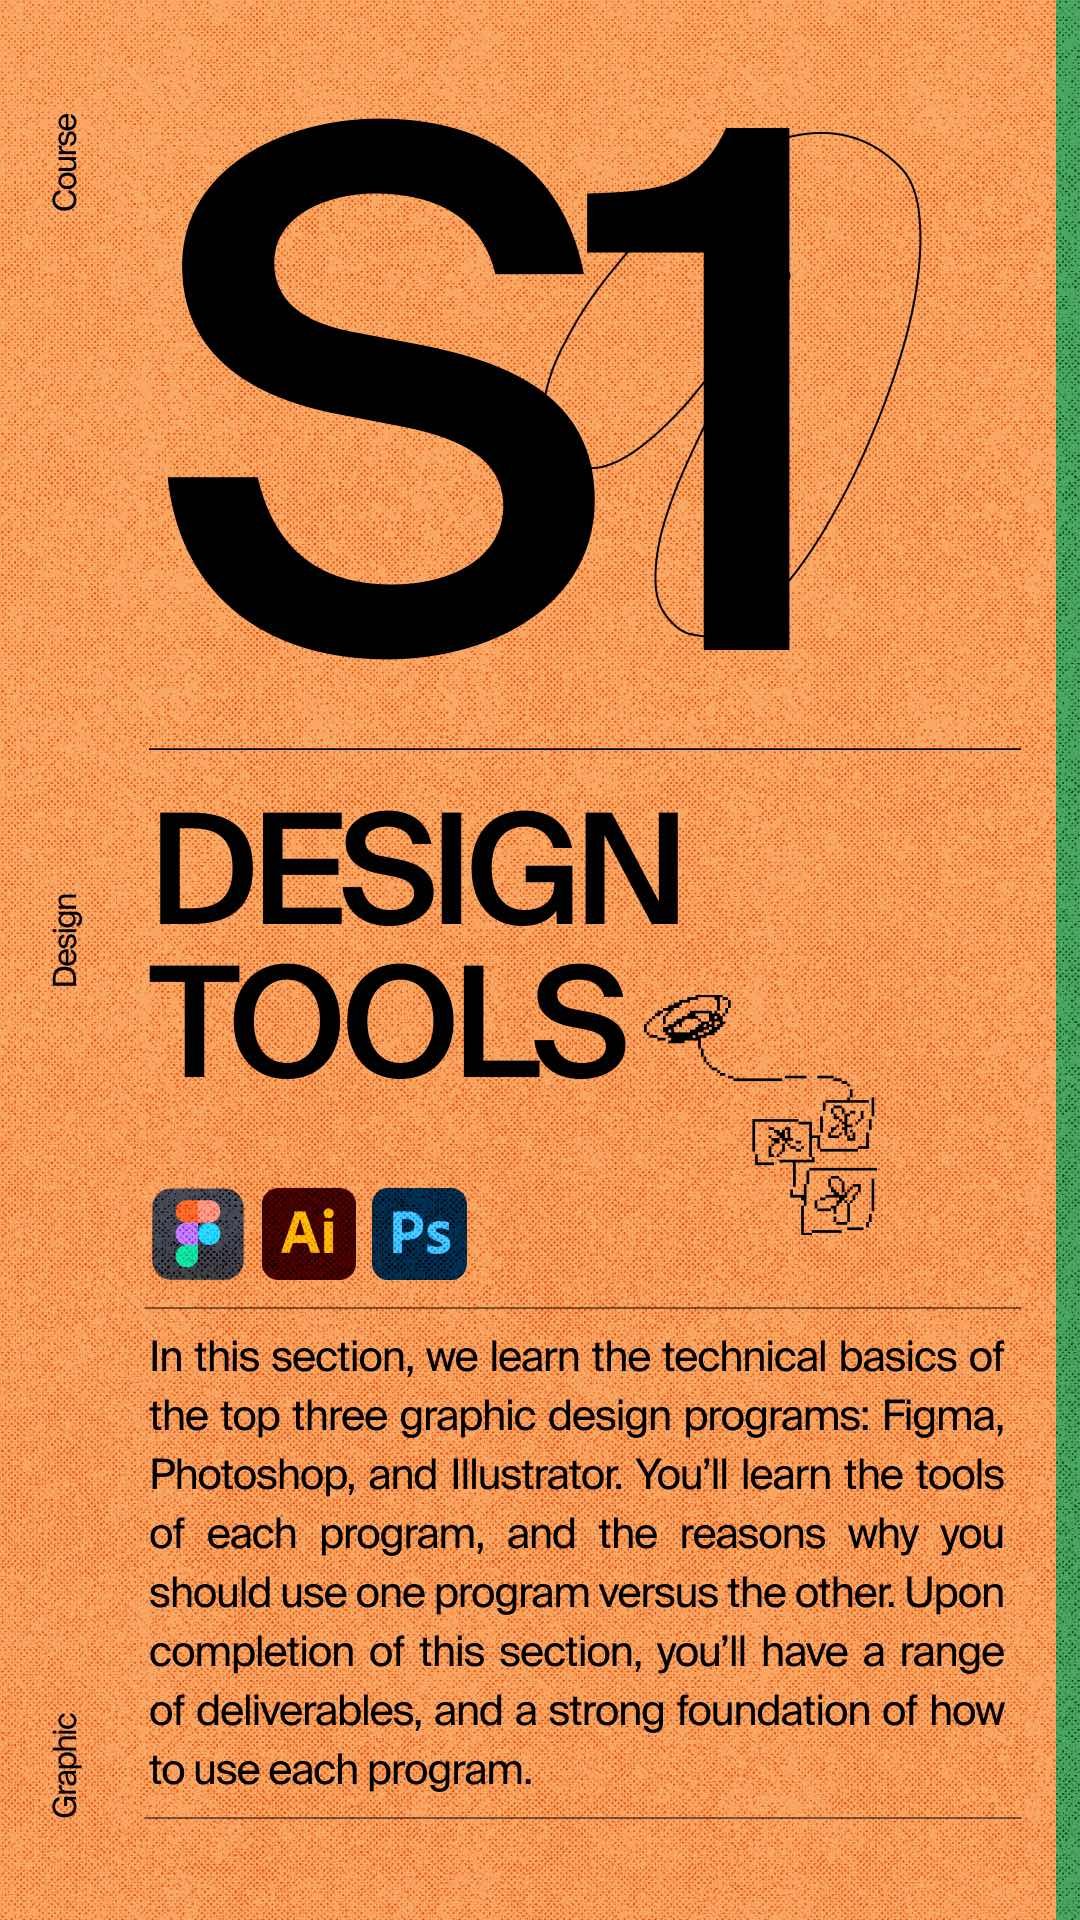 The Benefits of Tools for Graphic Design - Designs Valley